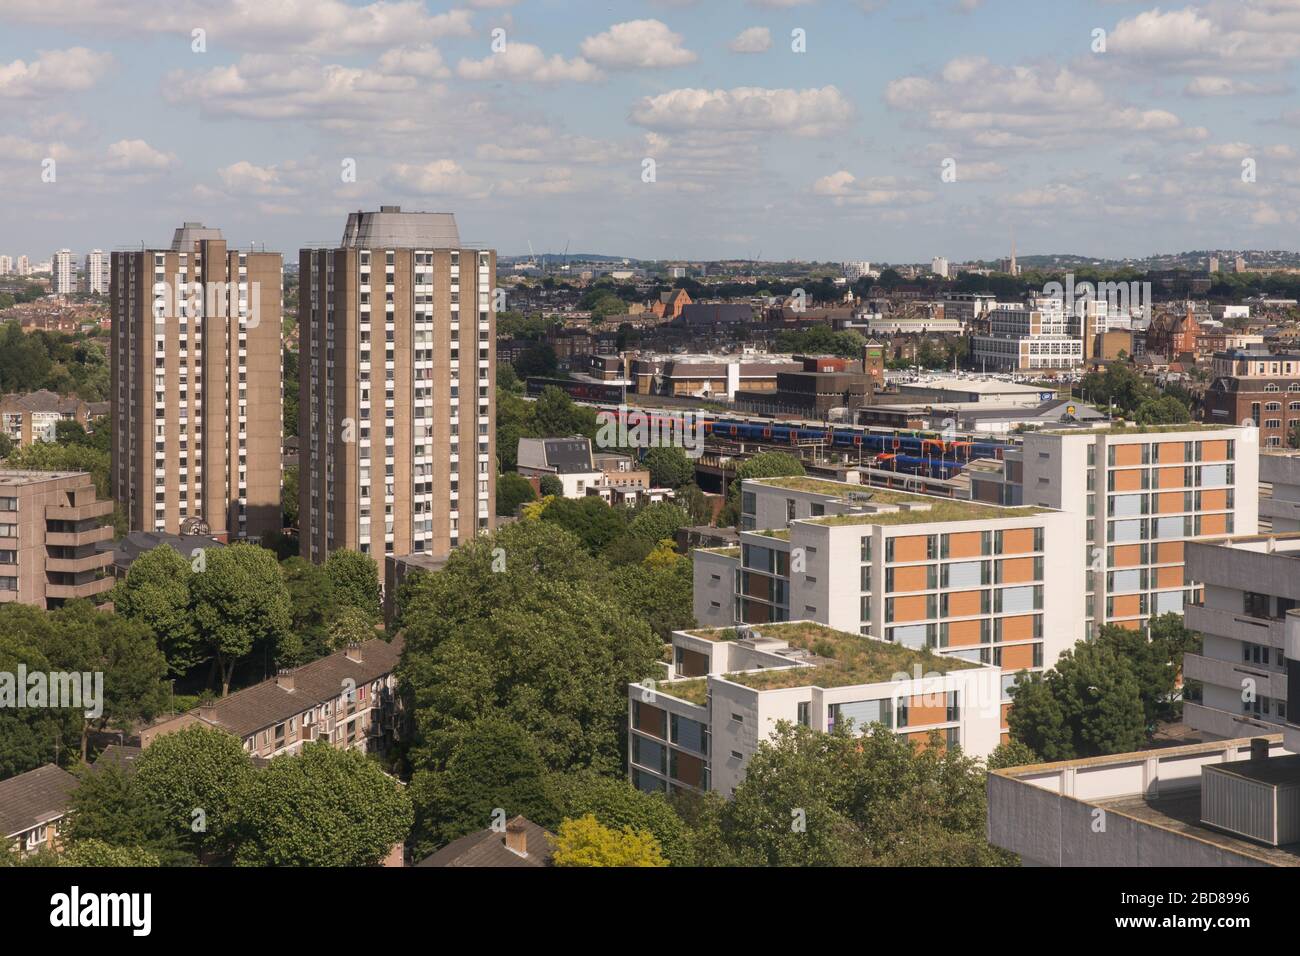 summer festival at winstanley and york road estate Stock Photo